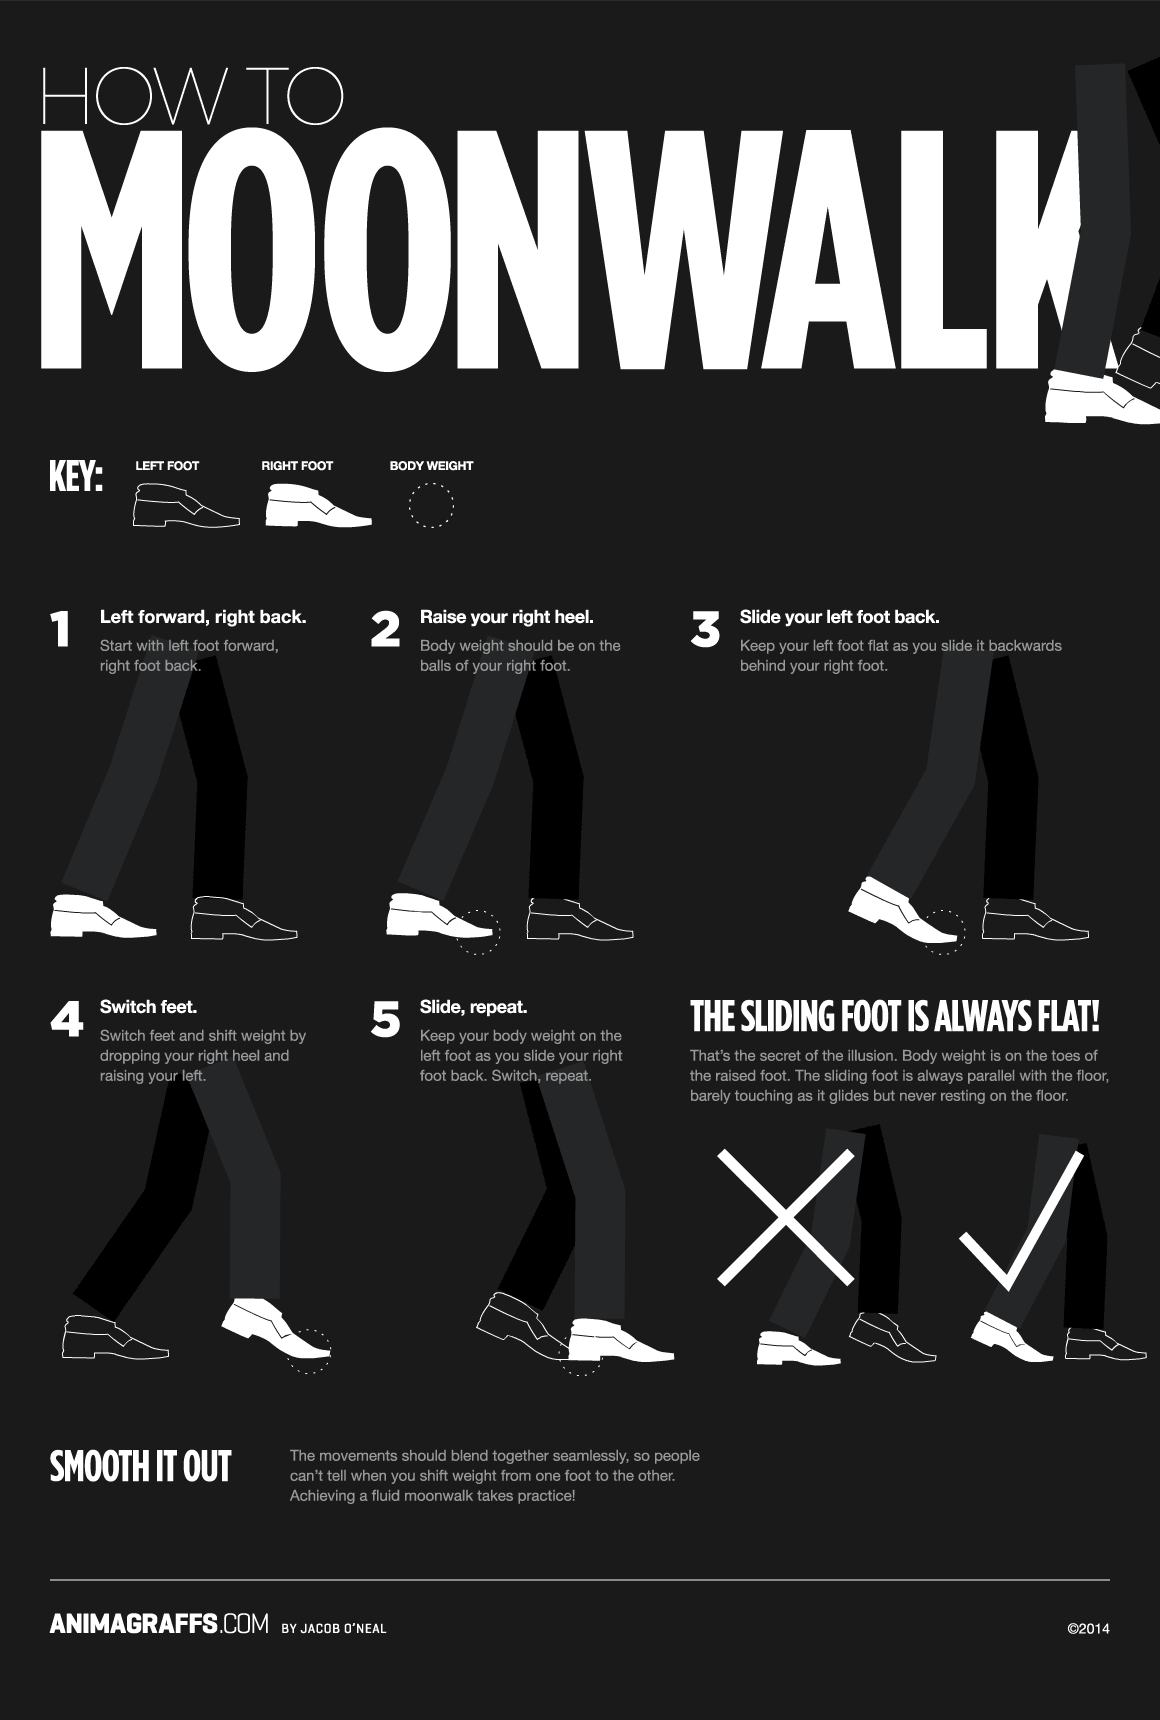 how to moonwalk just like mike in 5 simple steps infographic small